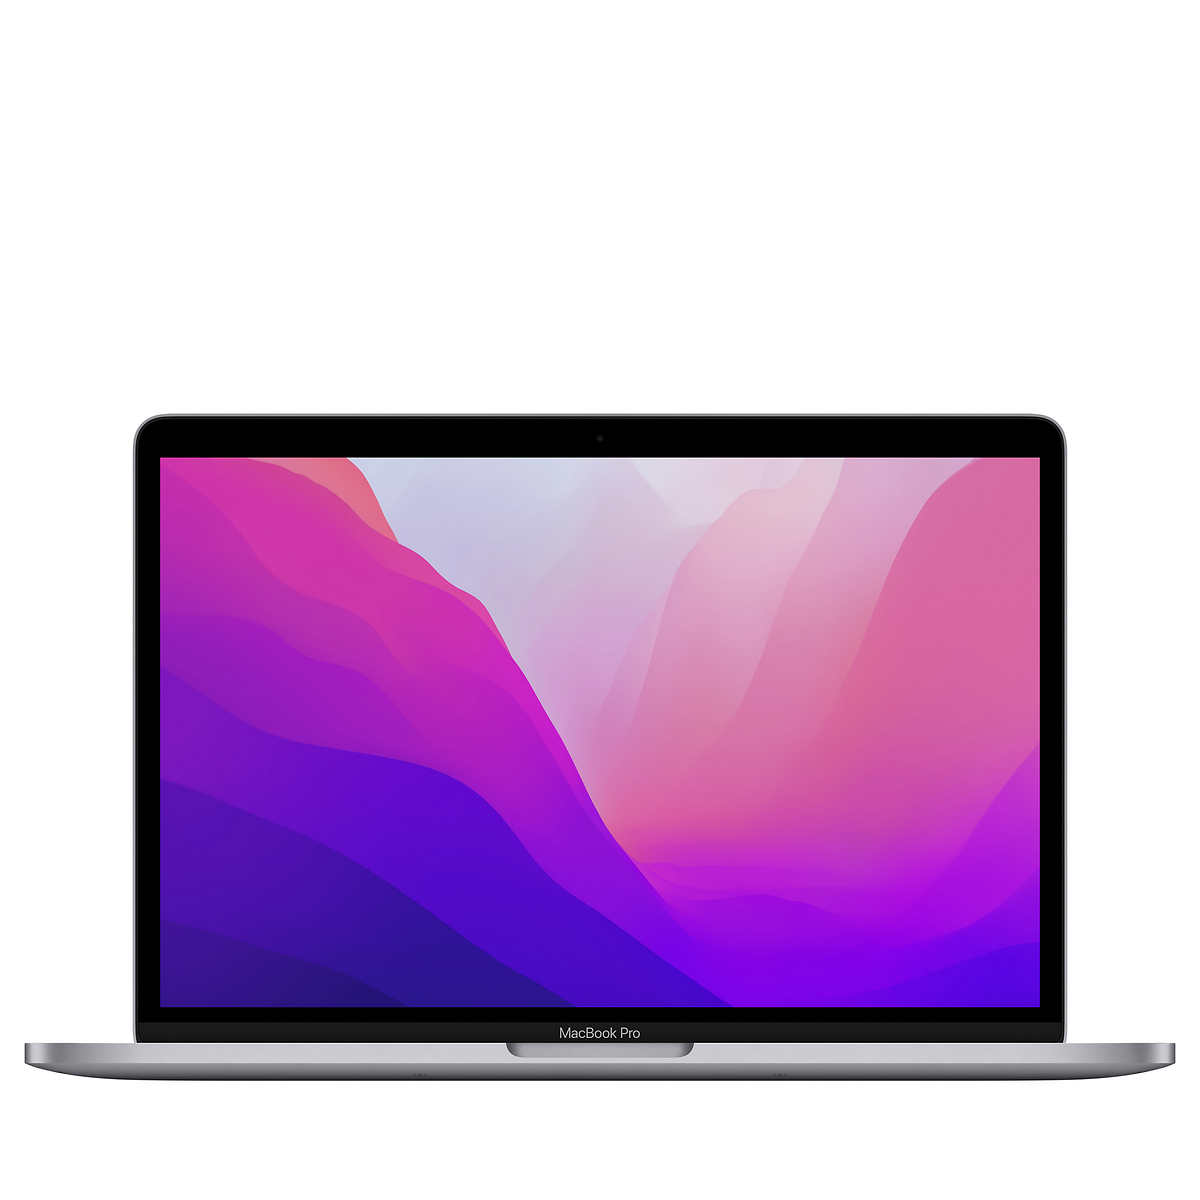 2017 MacBook Pro with Touch Bar now considered vintage